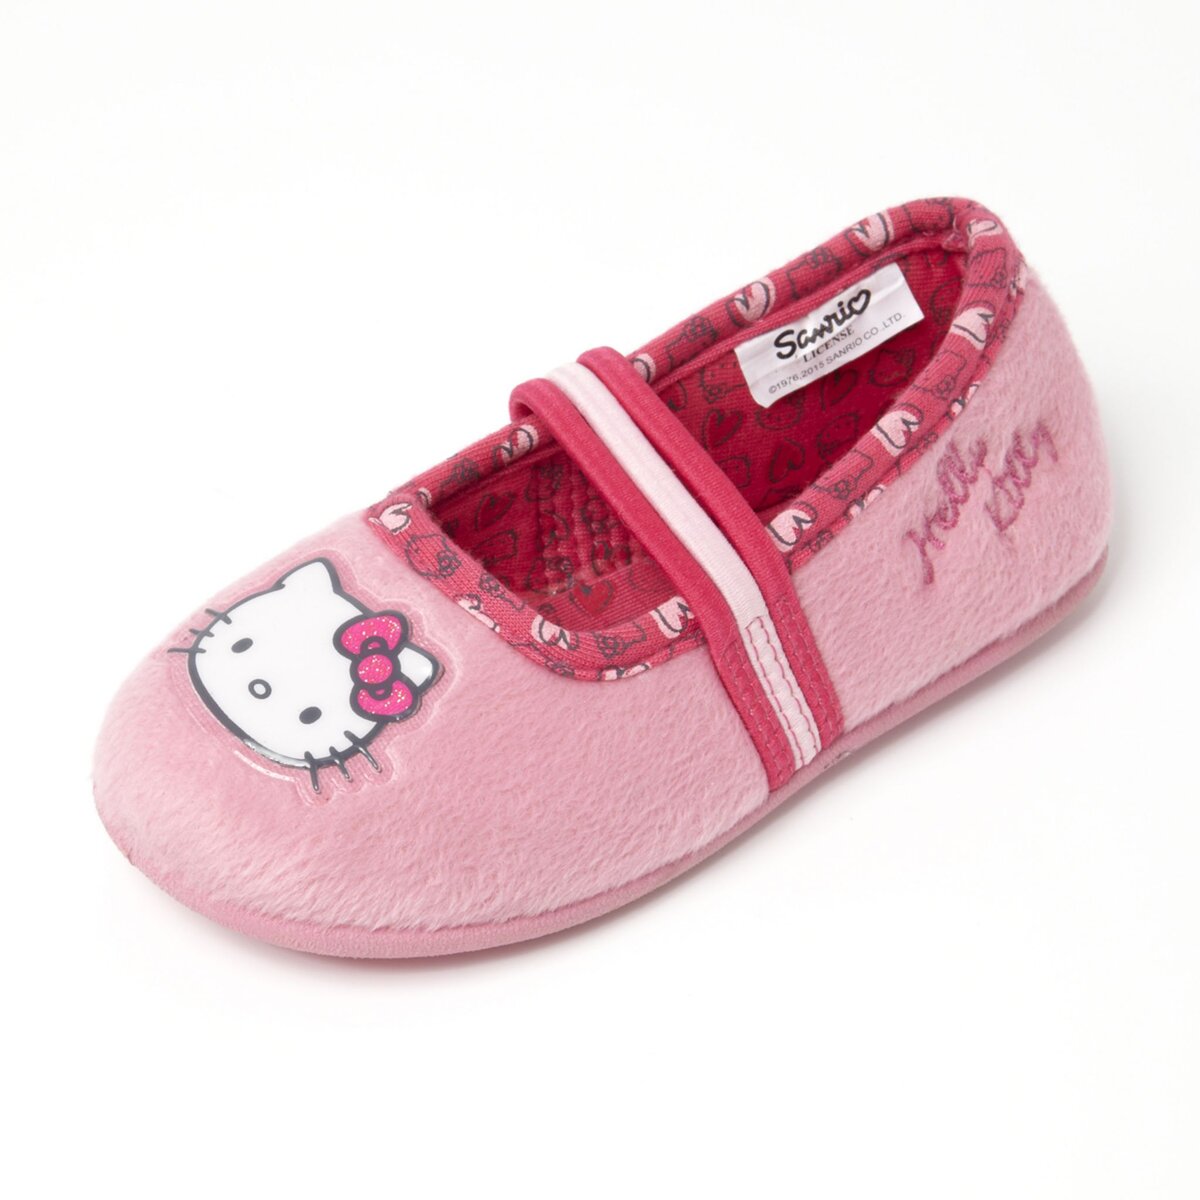 HELLO KITTY Chaussons fille du 24 au 30